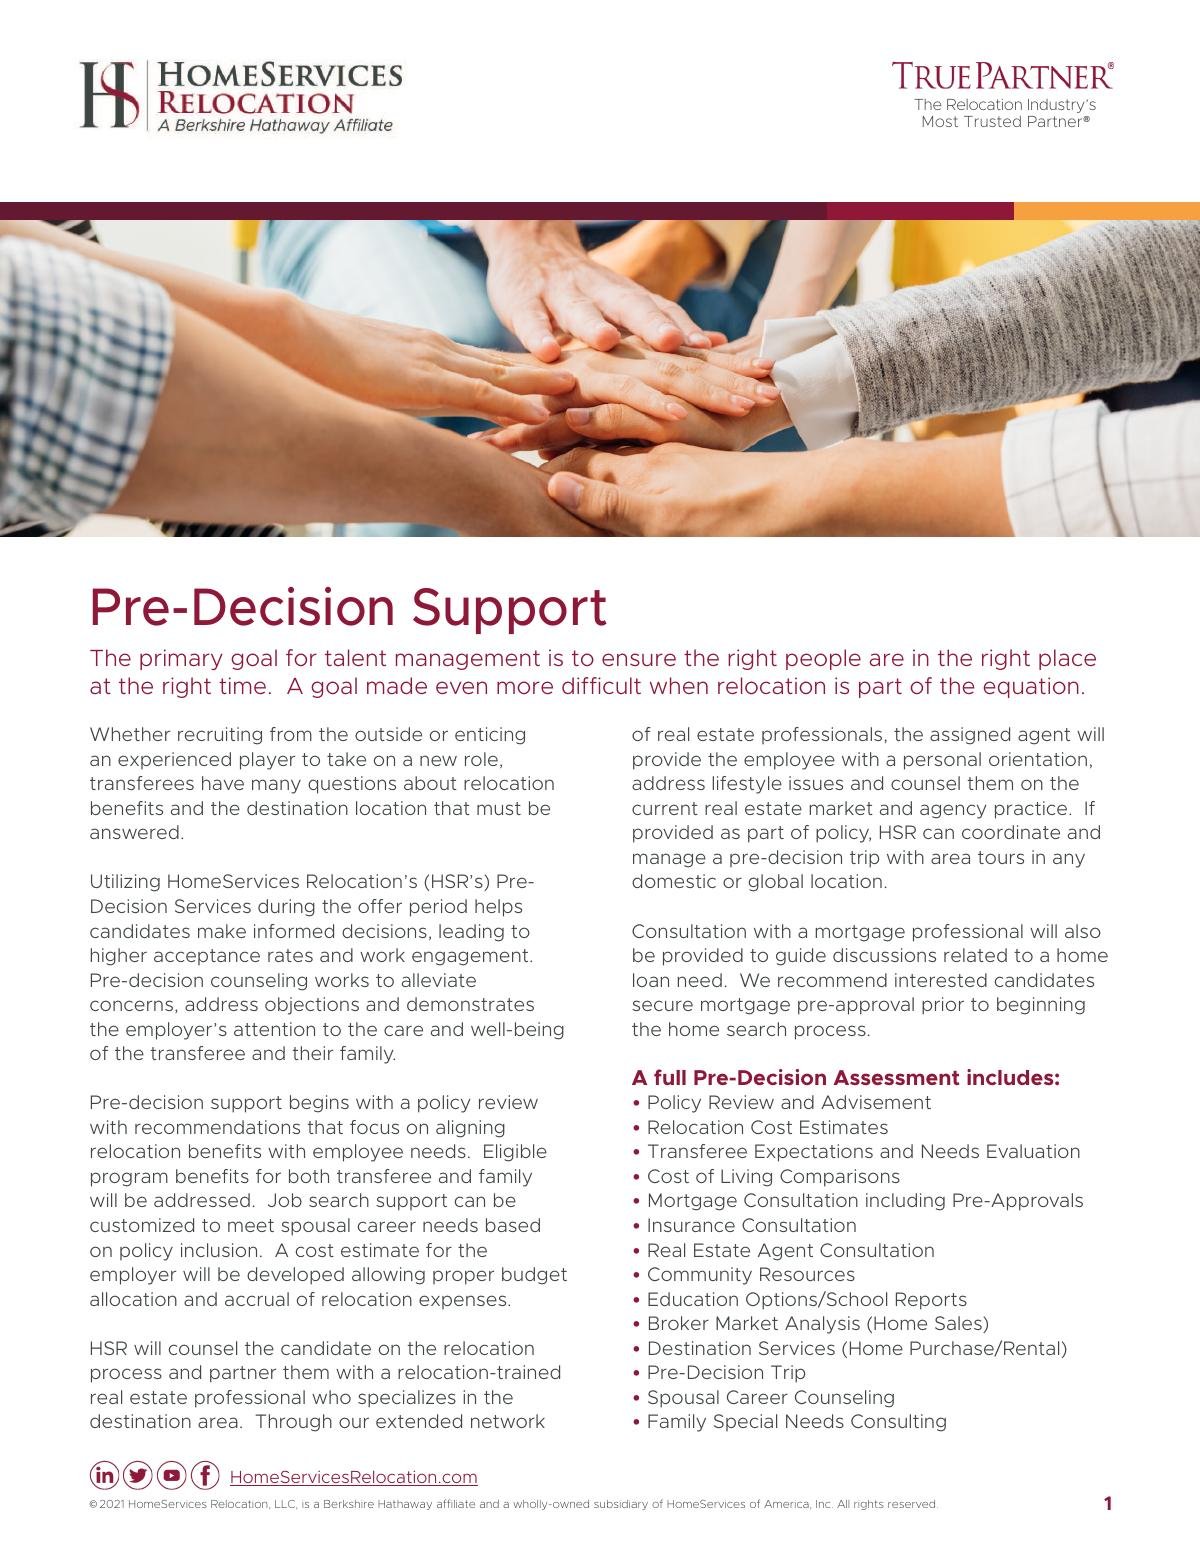 Managing a Successful Relocation with Pre-Decision Support